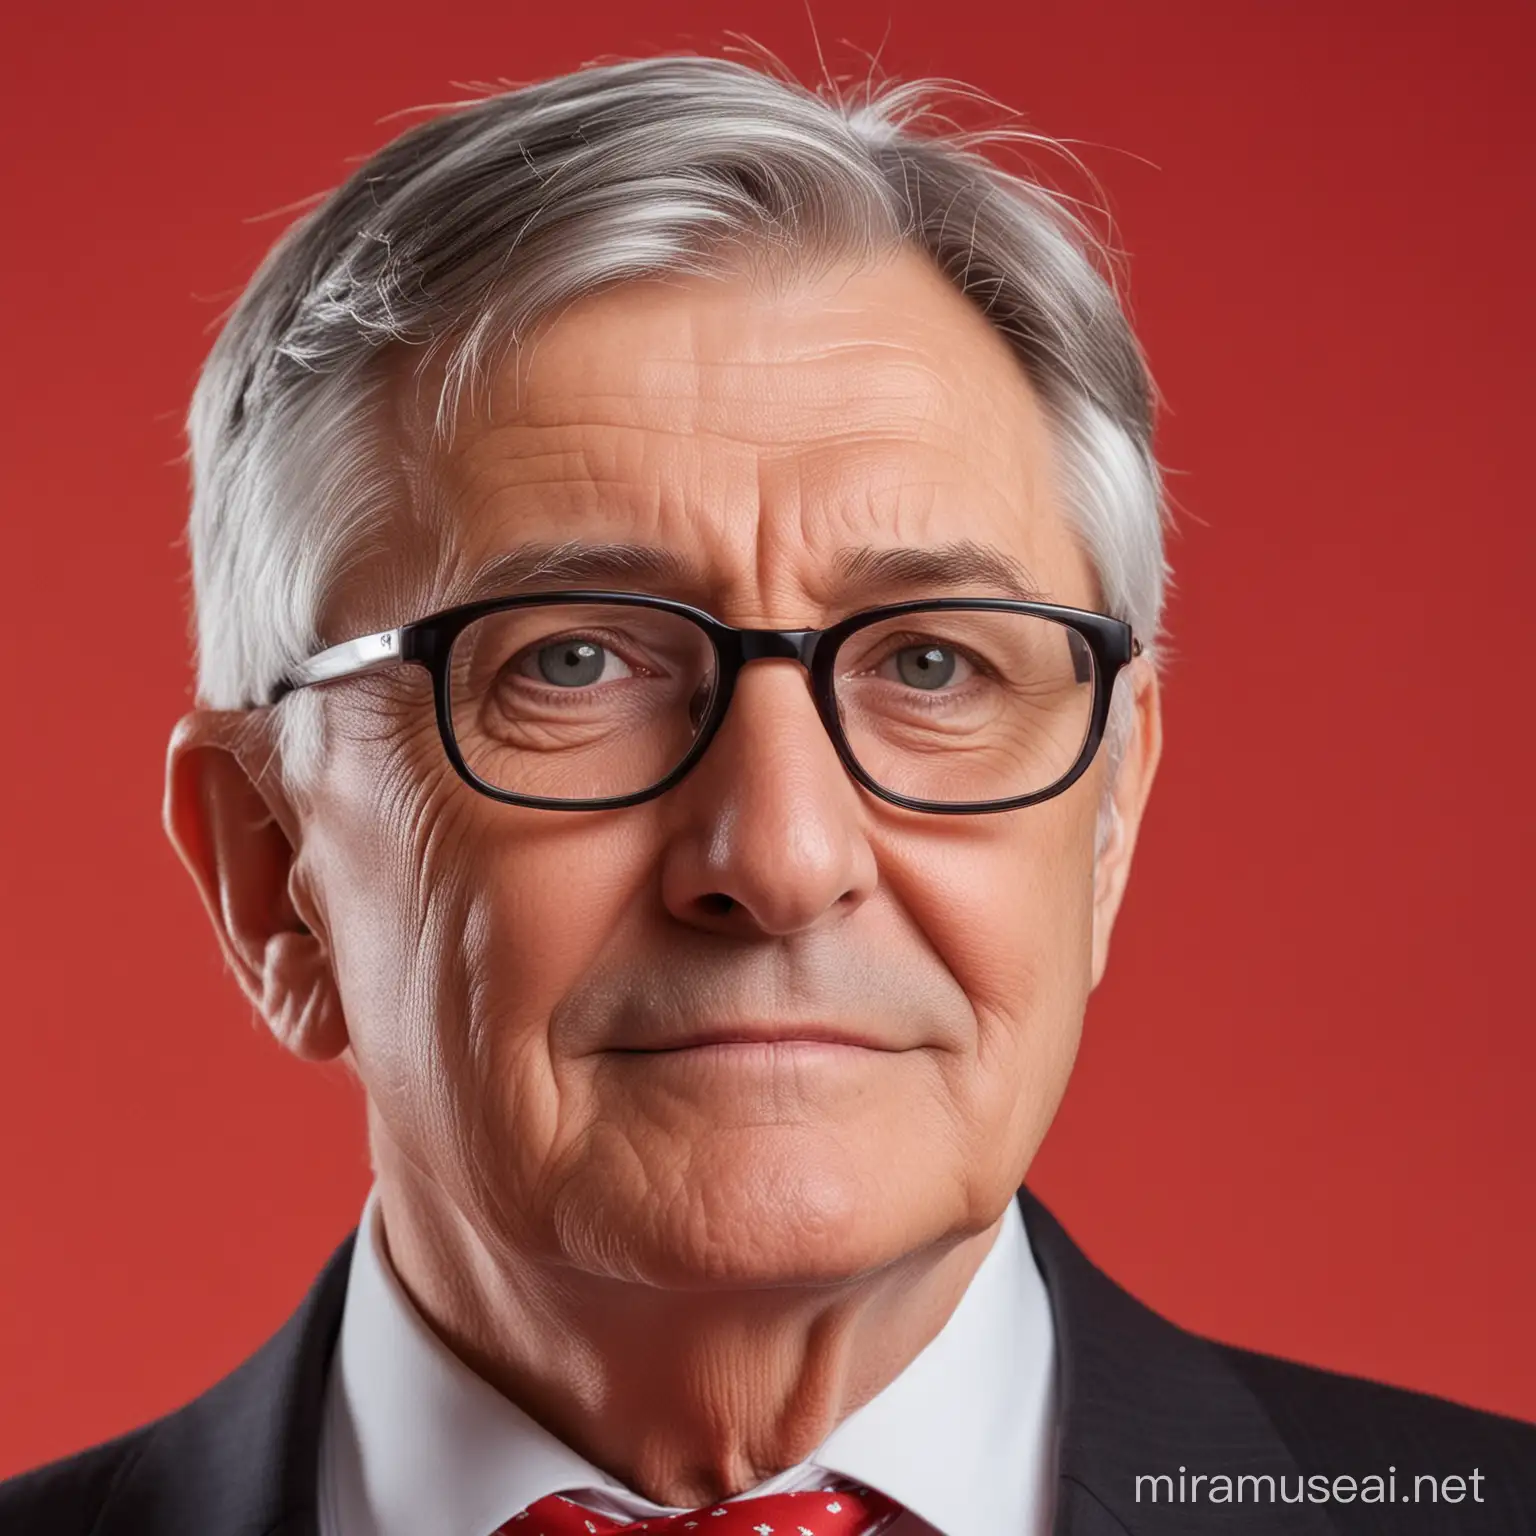 Senior Politician with Gray Hair and Glasses on Vibrant Red Background